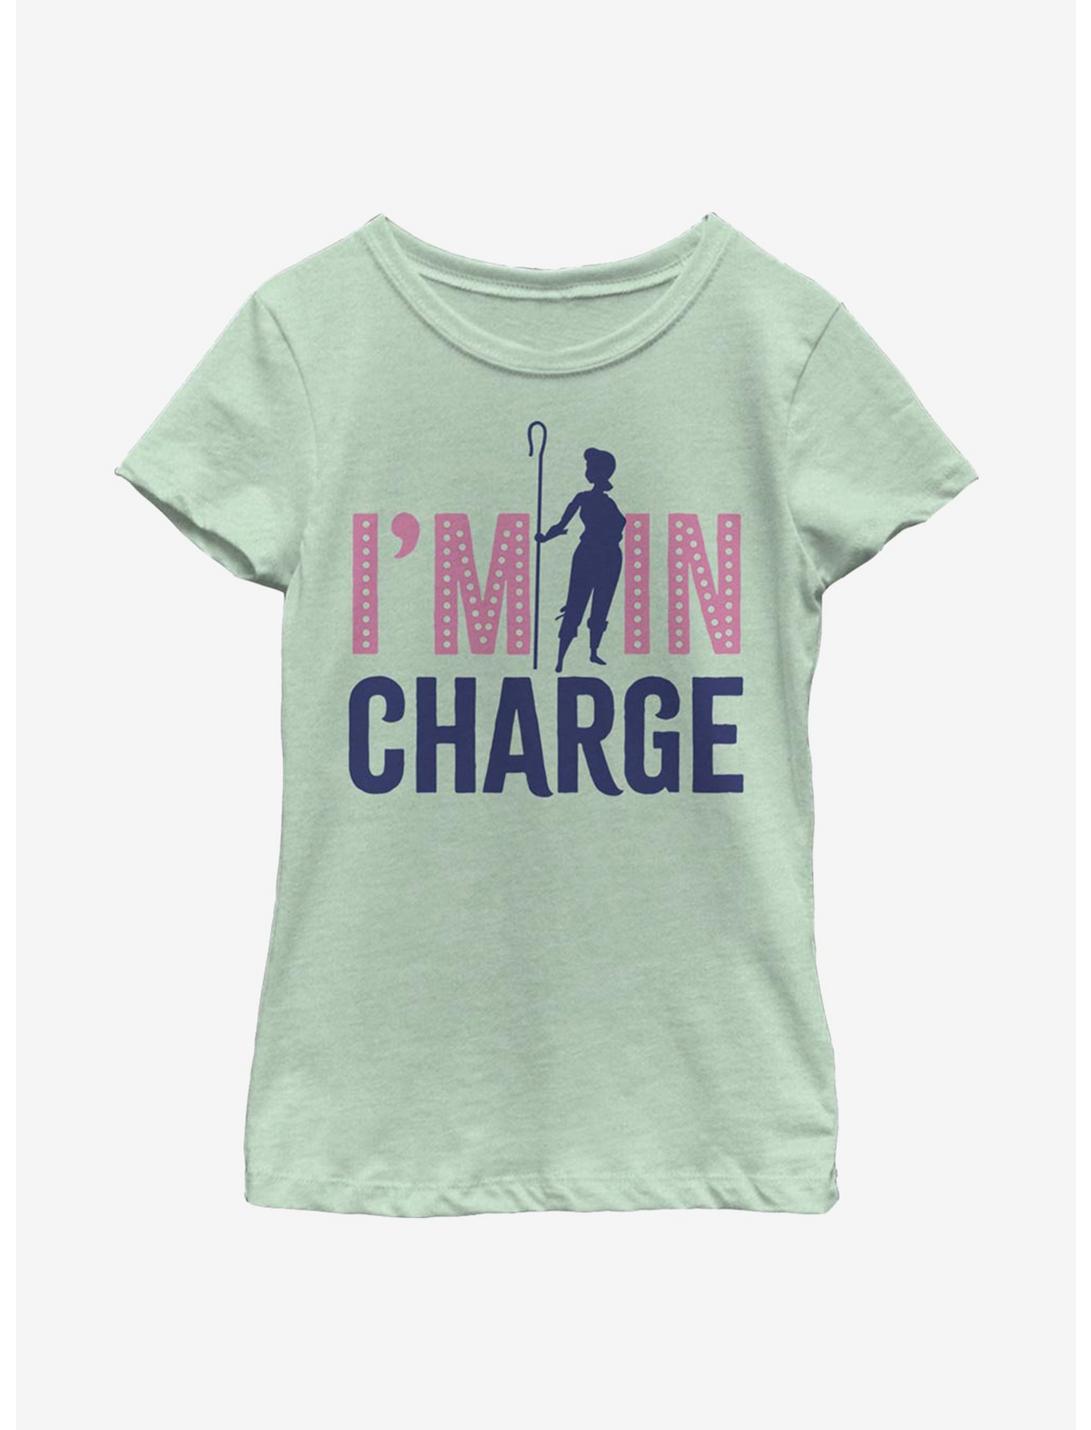 Disney Pixar Toy Story 4 In Charge Silhouette Youth Girls T-Shirt, MINT, hi-res